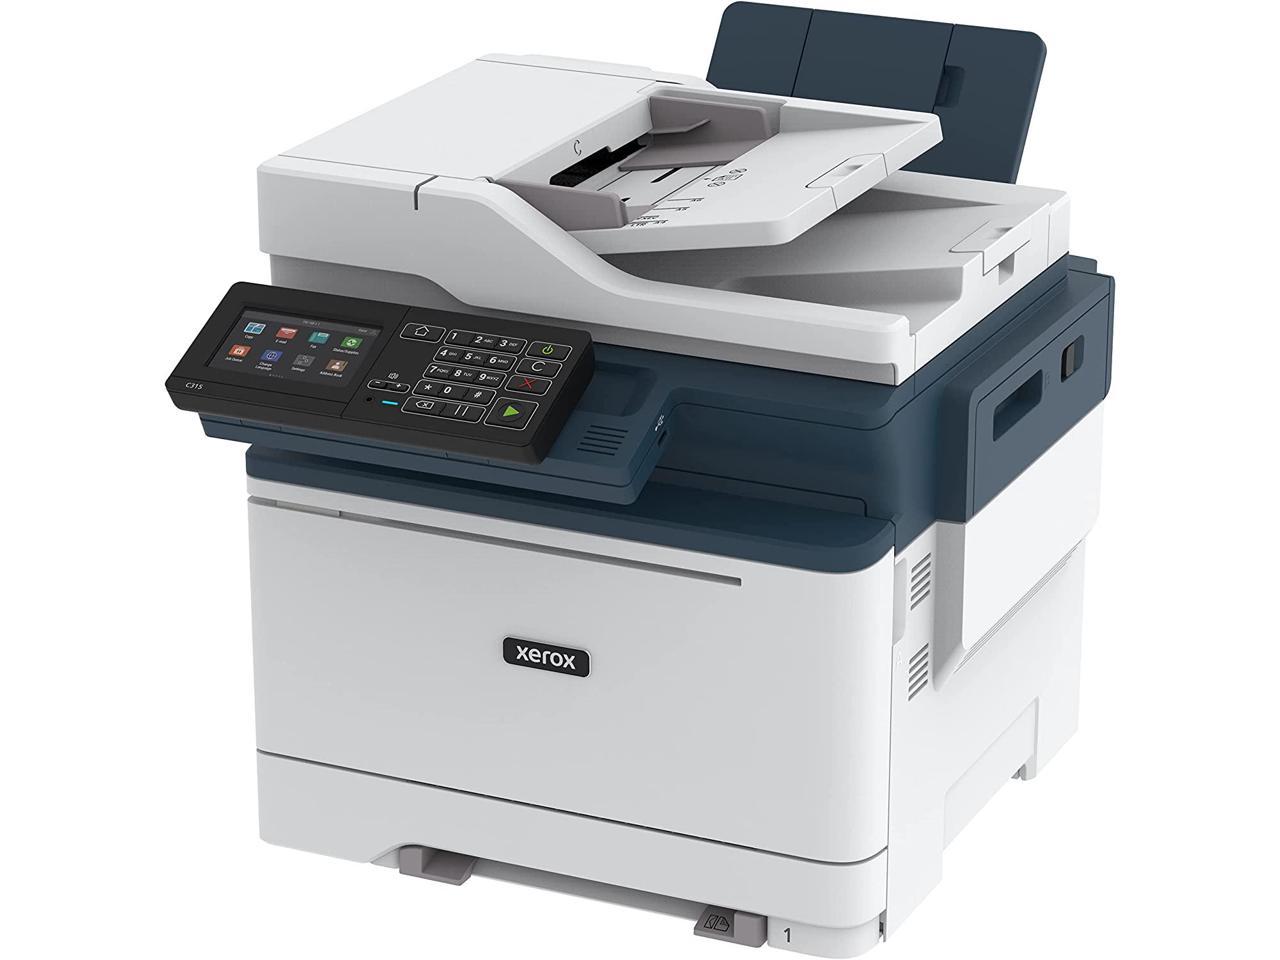 All in One Wireless Print/Scan/Copy Black and White Laser Xerox B225/DNI Multifunction Printer 